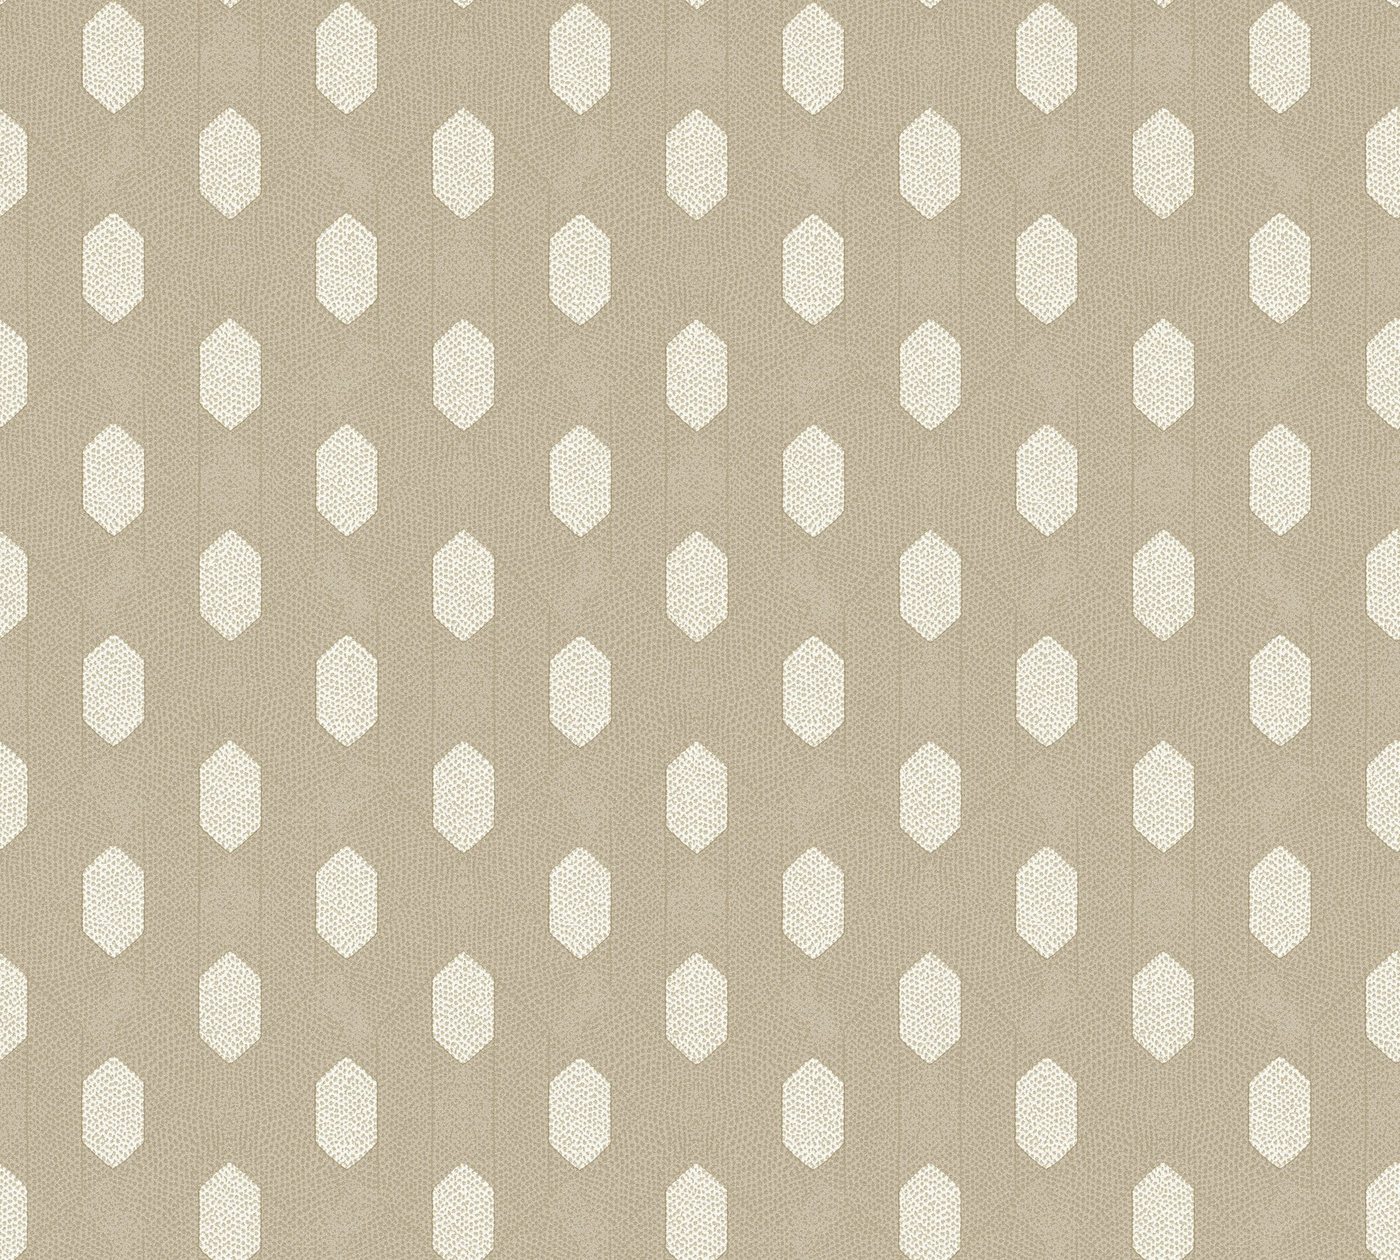 Architects Paper Vliestapete Architects Paper Absolutely Chic, Vintagetapete, creme, gold von Architects Paper